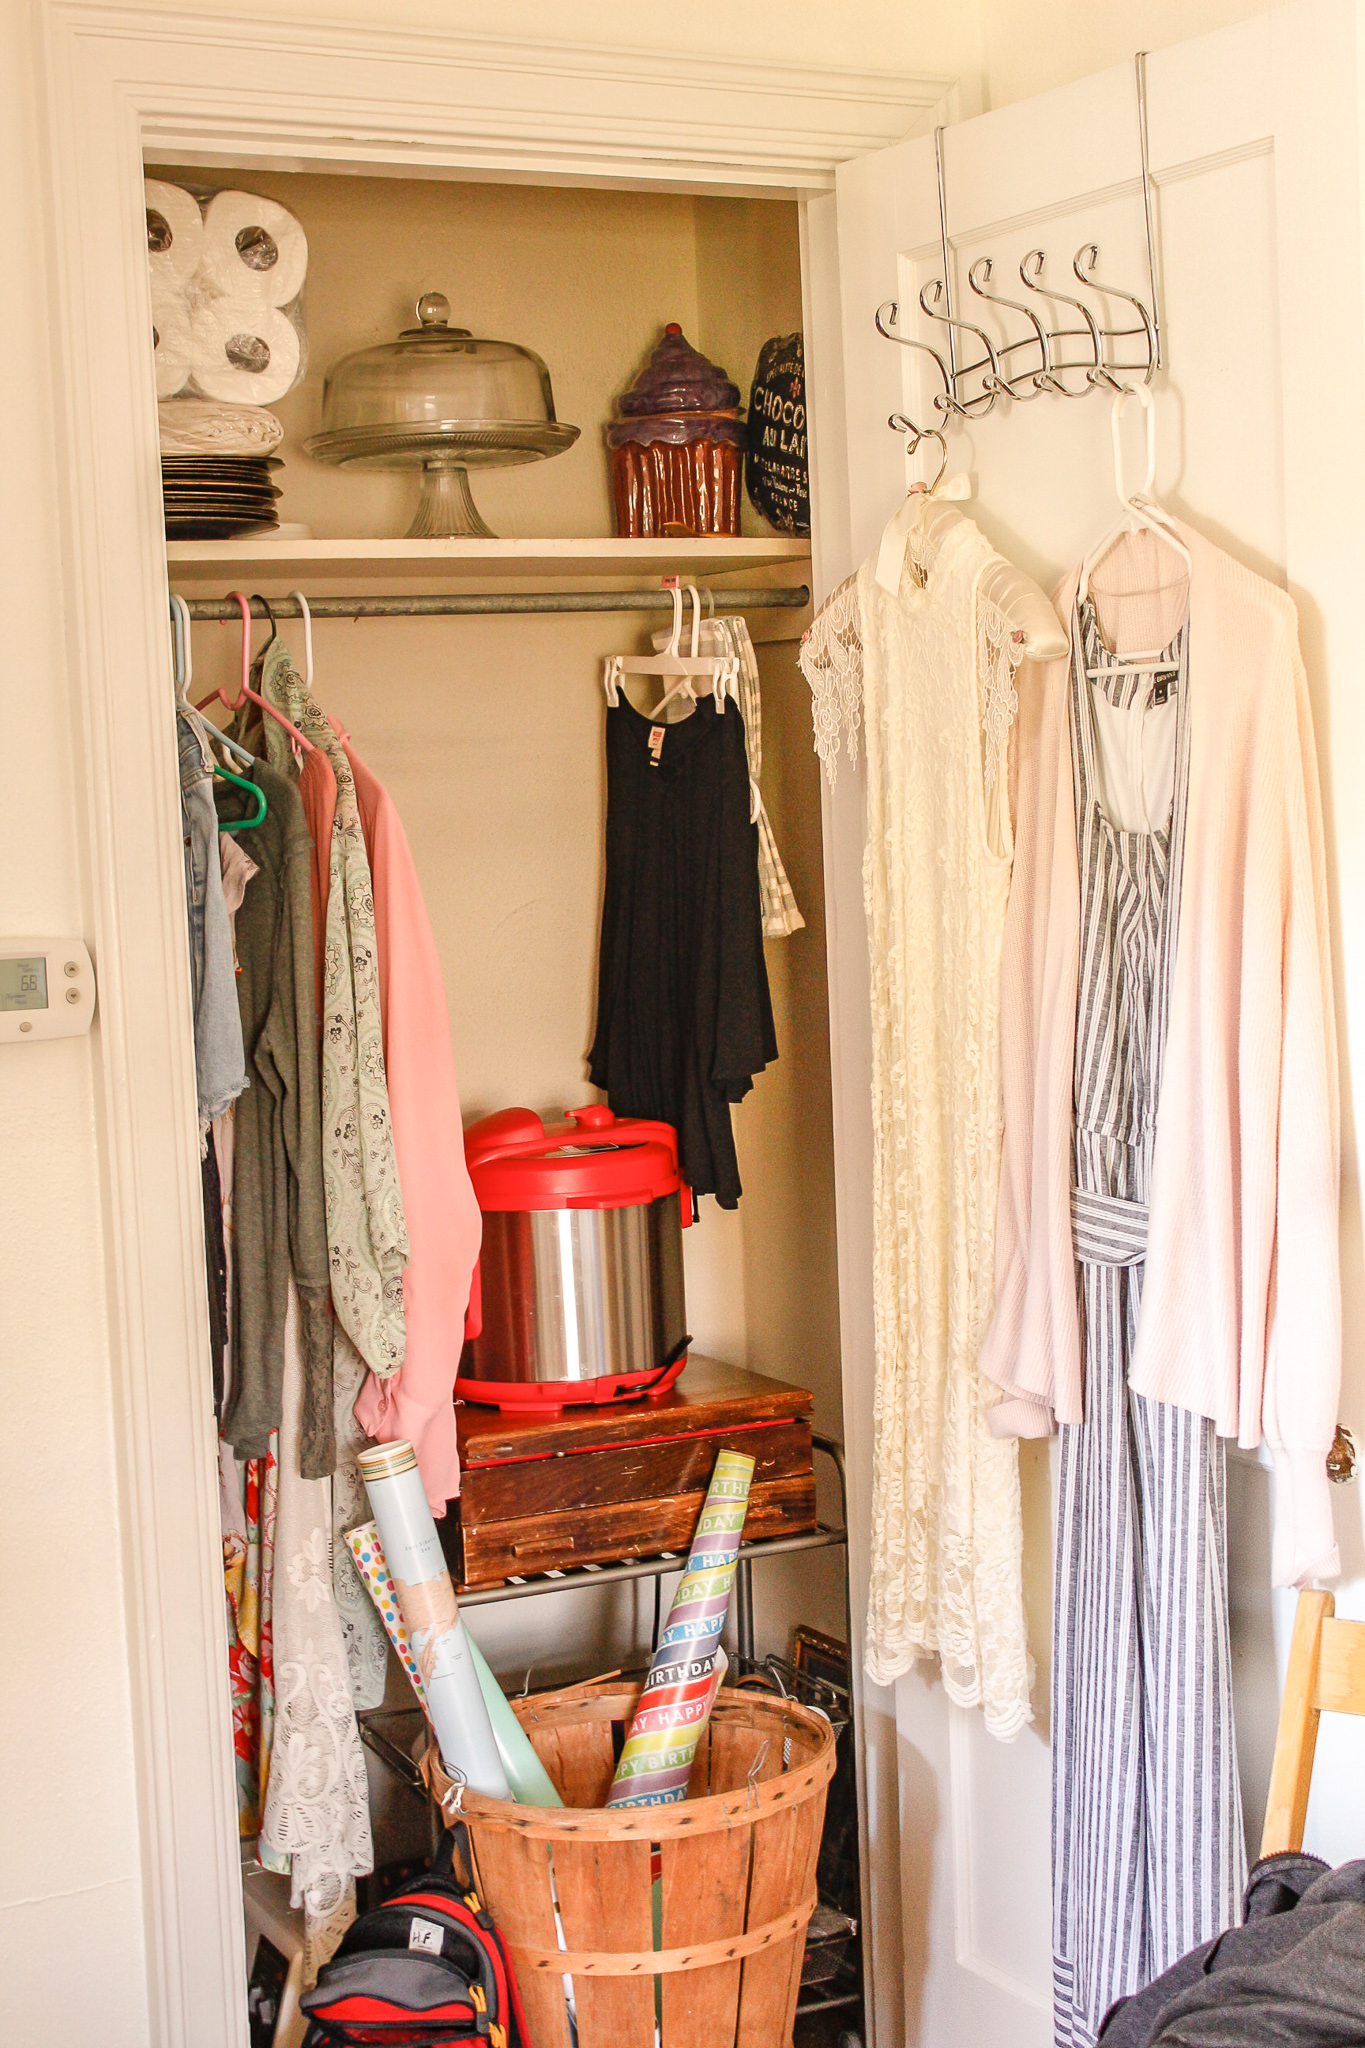 Creating an Organized Pantry from a Hall Closet - The Palette Muse